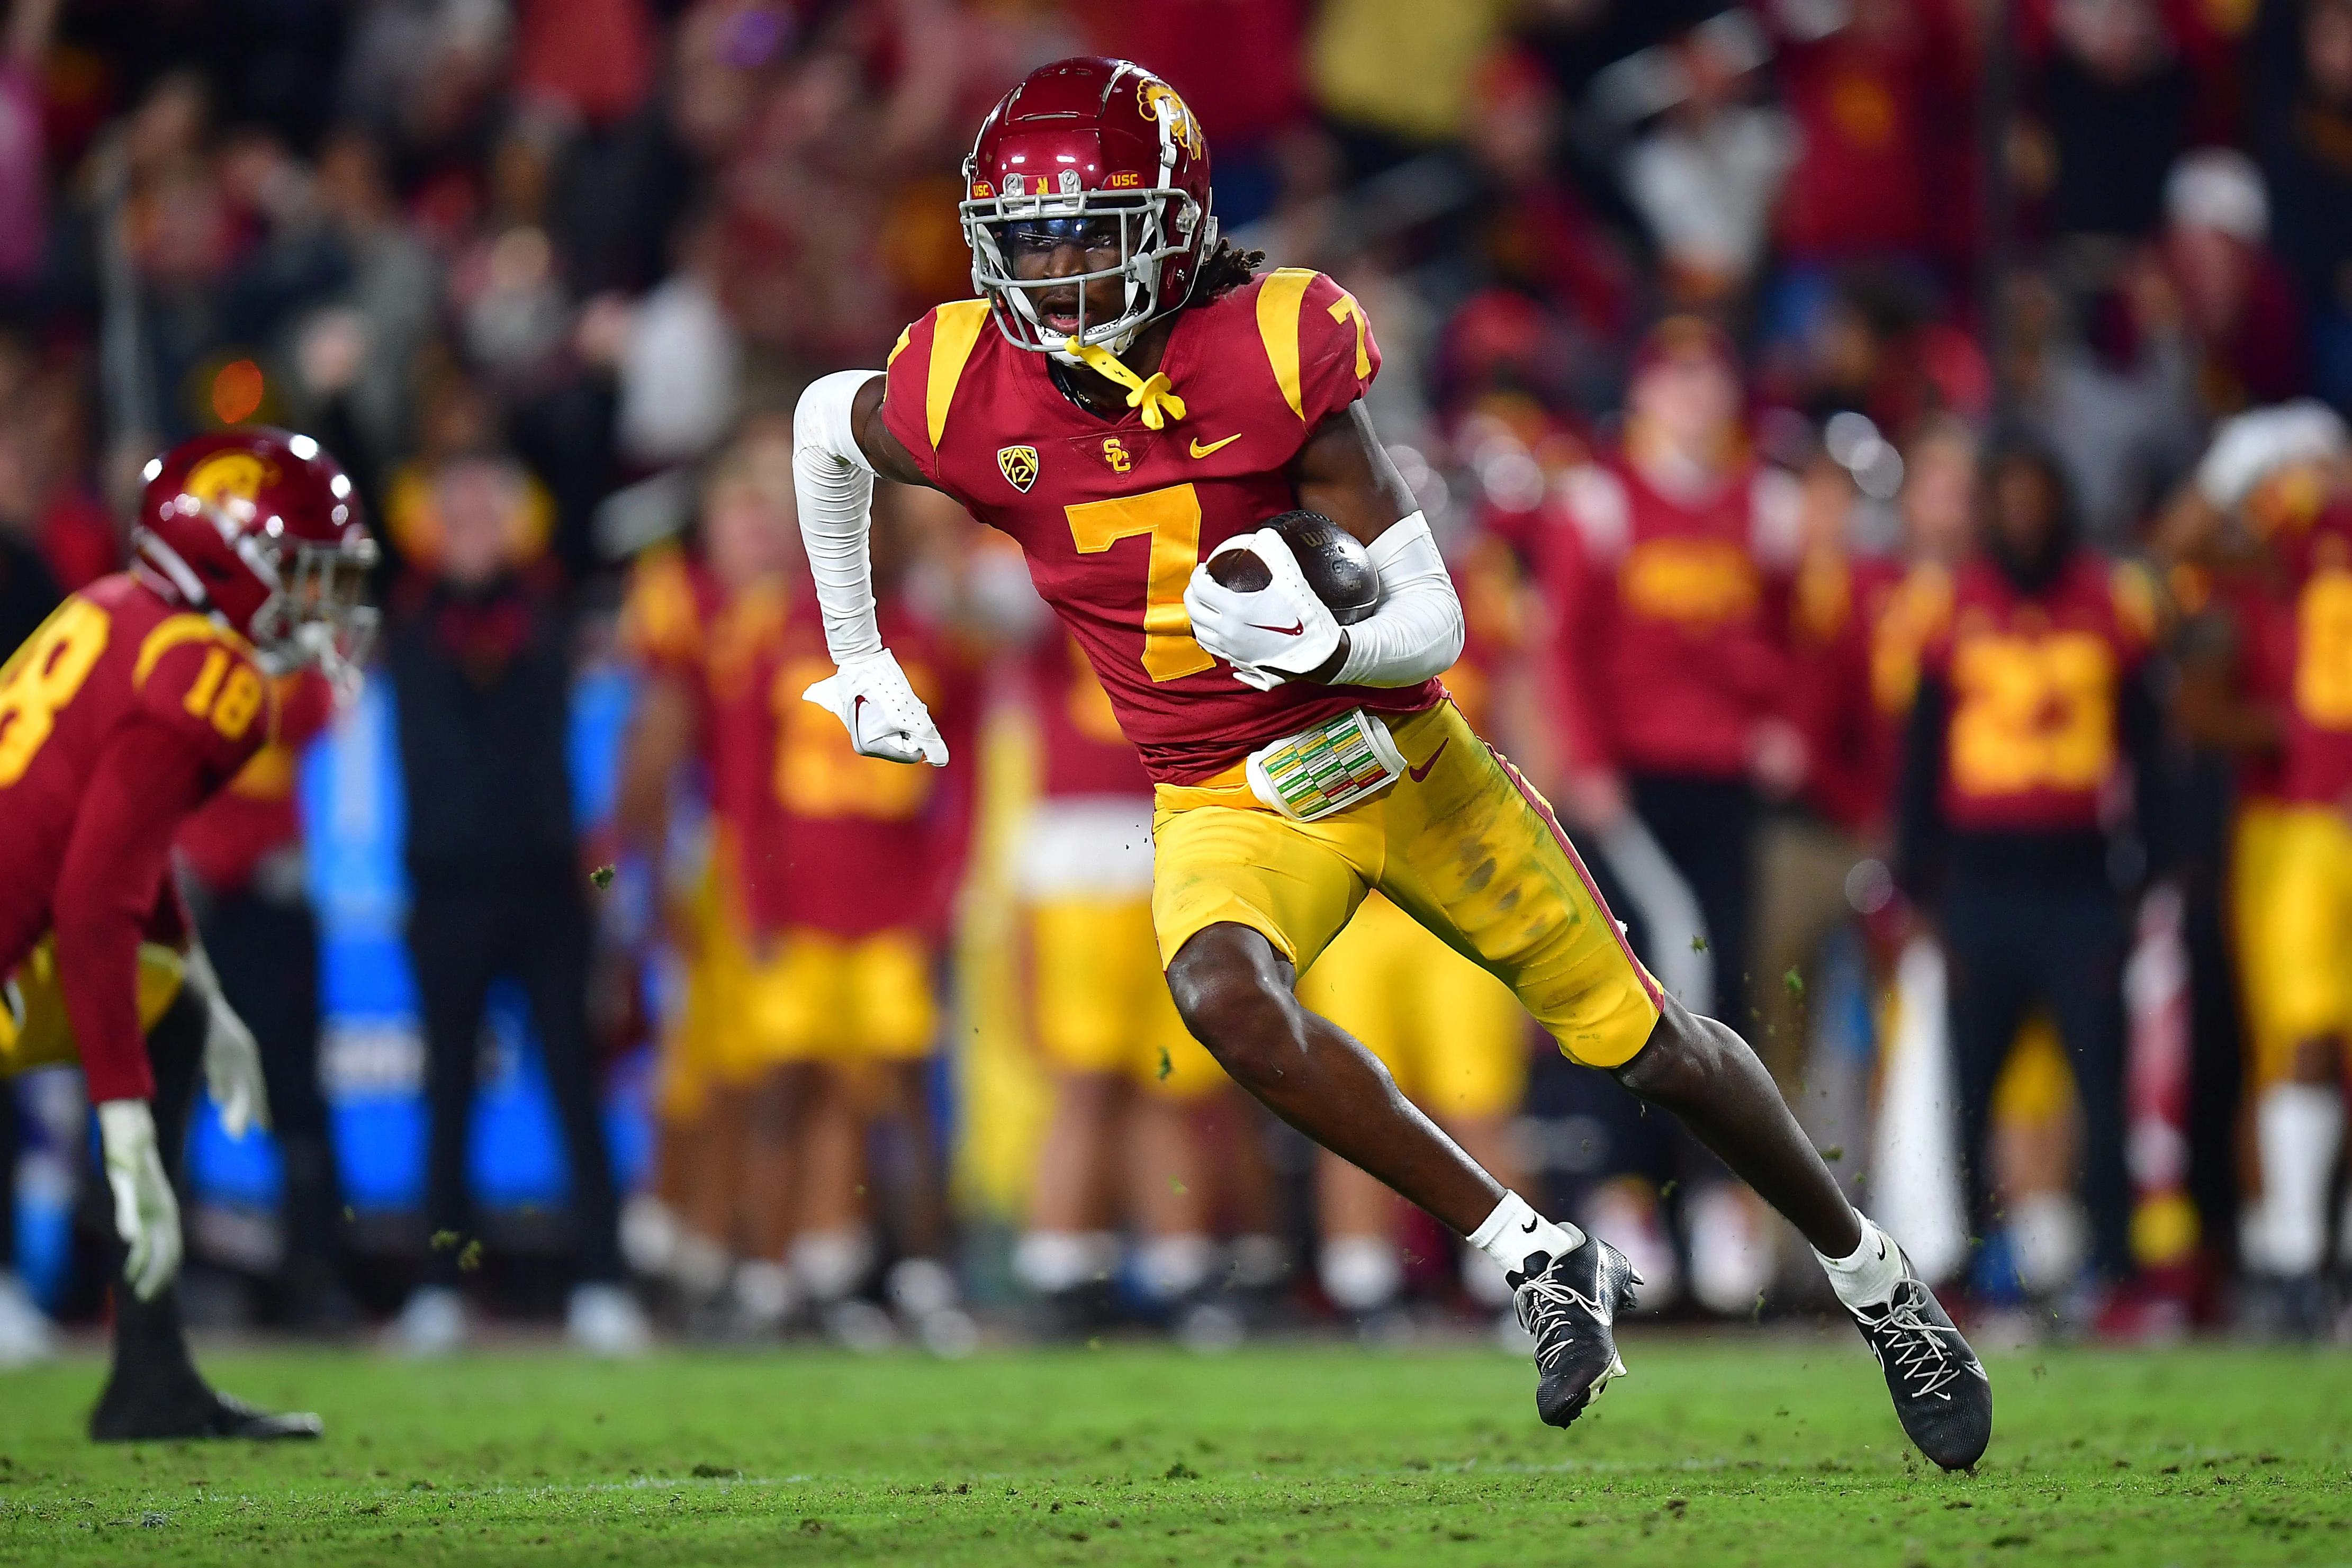 Nov 26, 2022; Los Angeles, California, USA; Southern California Trojans defensive back Calen Bullock (7) runs the ball after an interception against the Notre Dame Fighting Irish during the second half at the Los Angeles Memorial Coliseum.